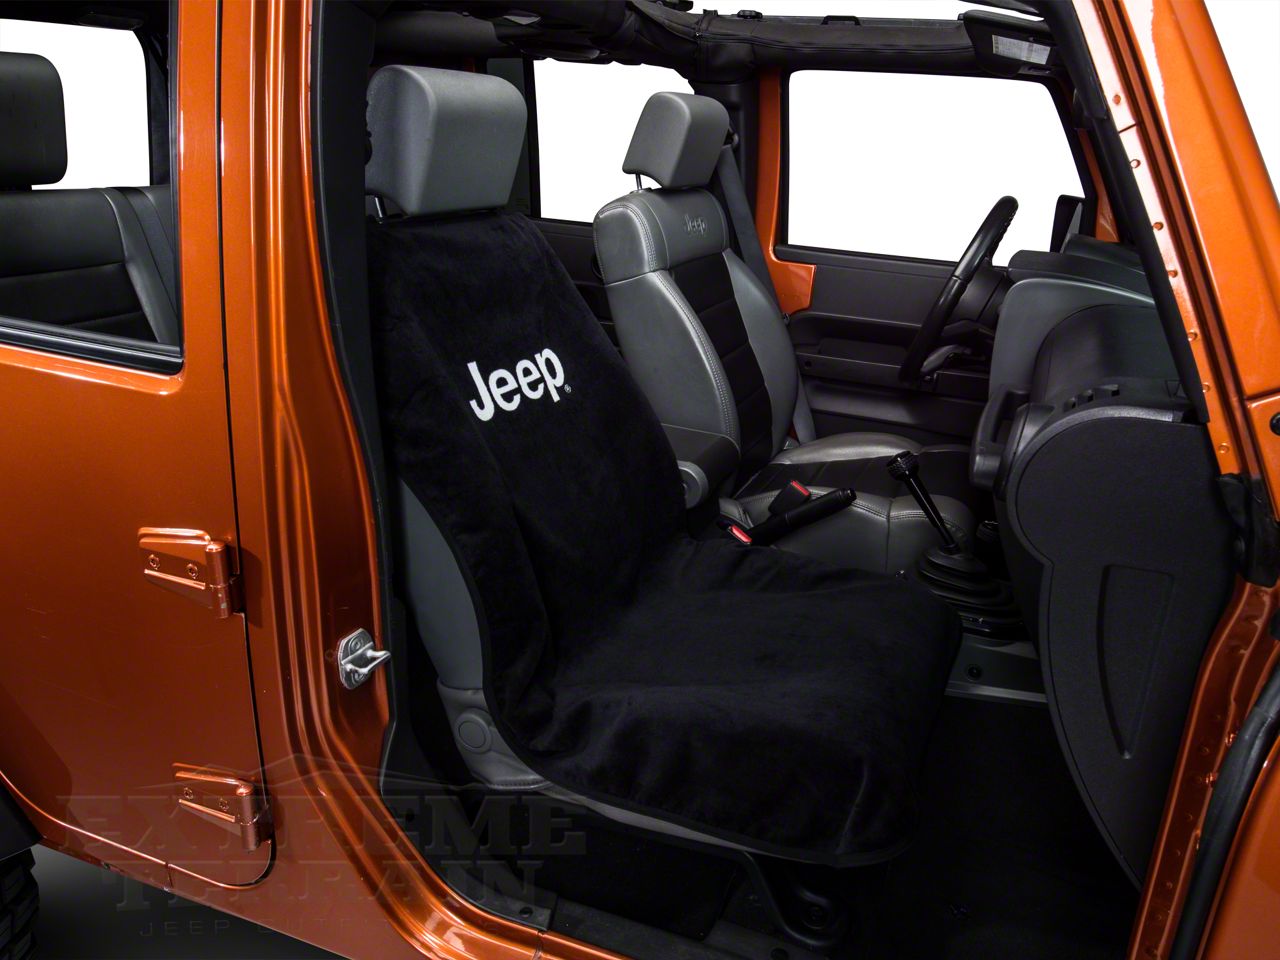 Clazzio 712011blk Black Leather Front Row Seat Cover for Jeep Wrangler 2 Door 